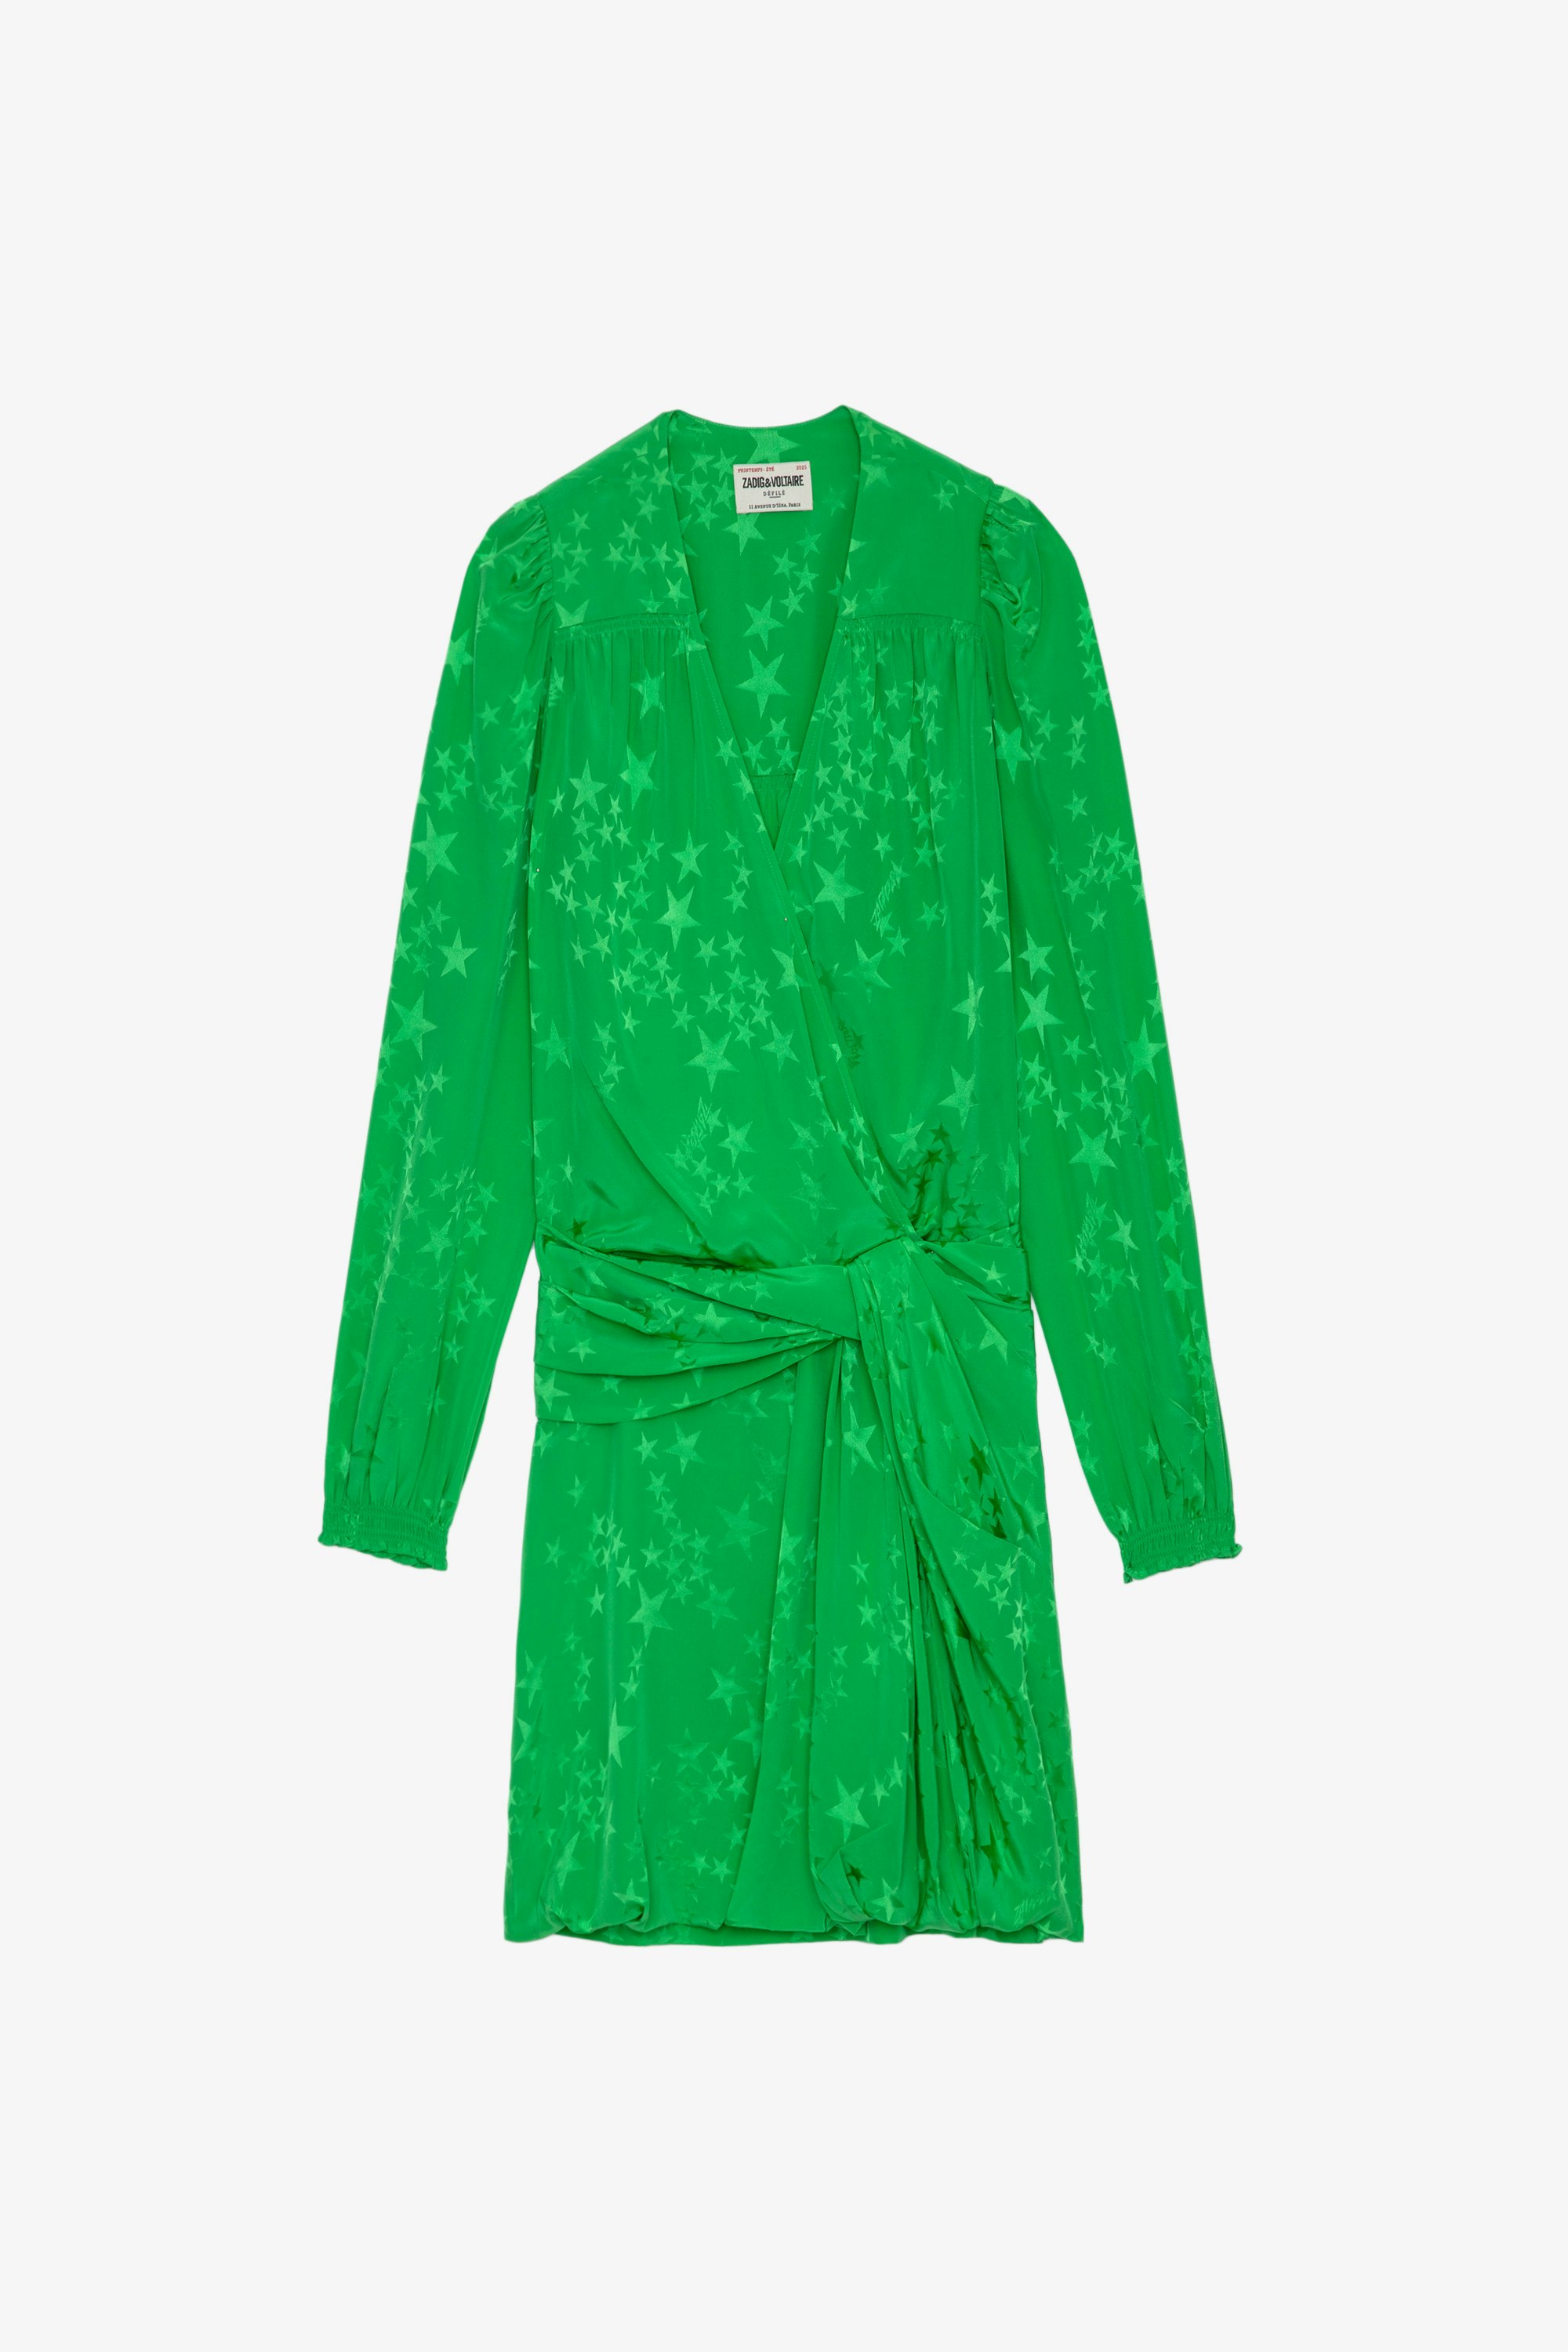 Recol Jac シルク ワンピース Women’s apple green silk jacquard mini dress with draped effect, embellished with stars and tied at the waist